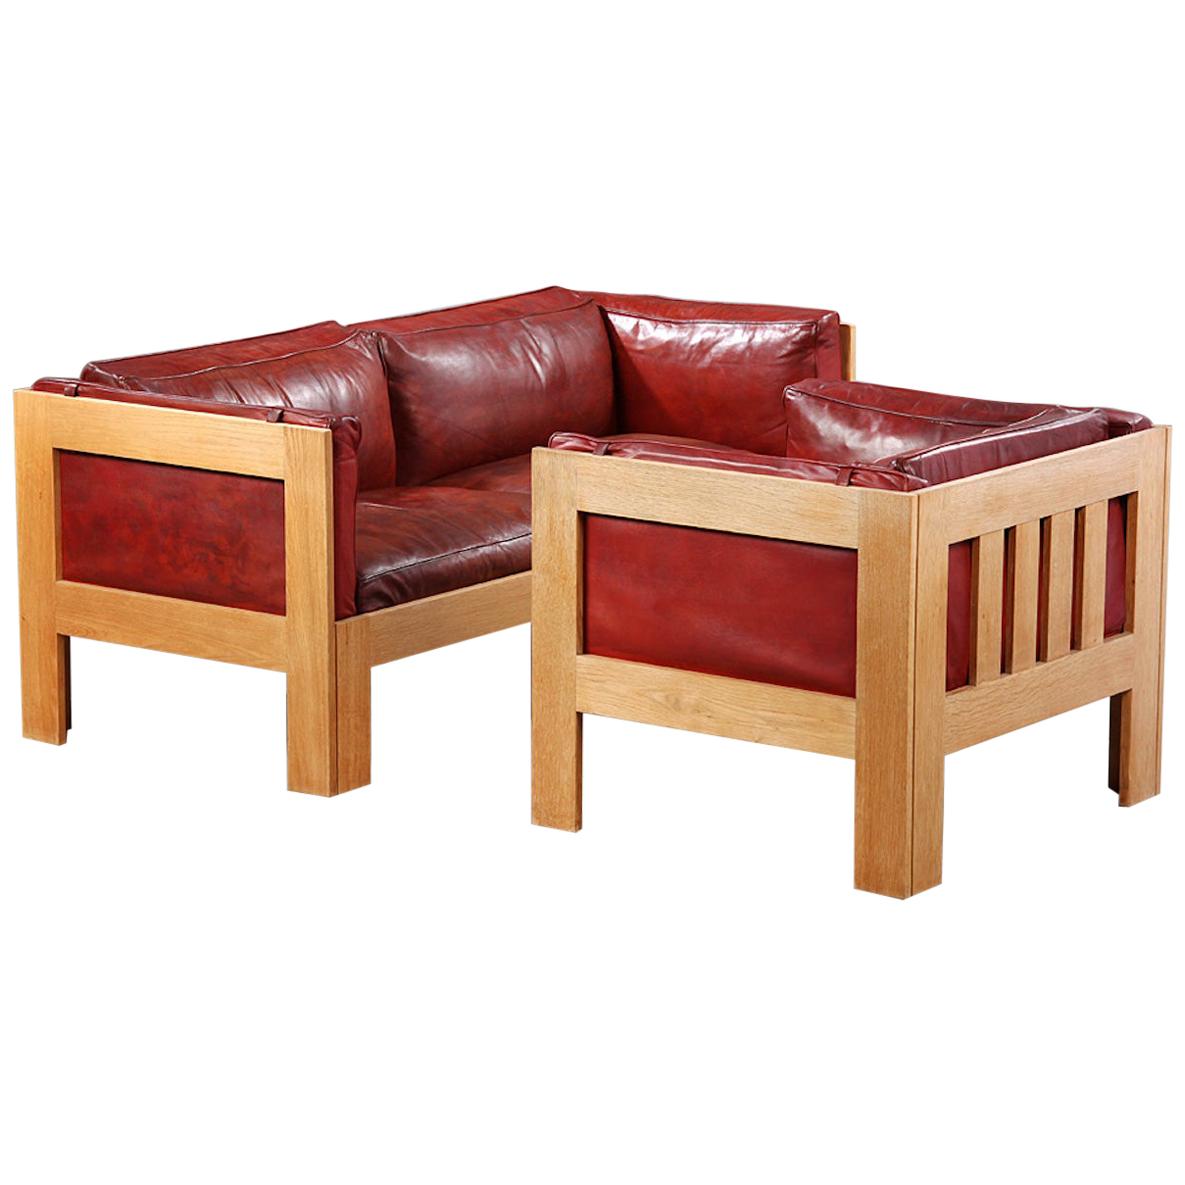 Tage Poulsen Sofa and Chair in Red Leather and Oak Frame For Sale